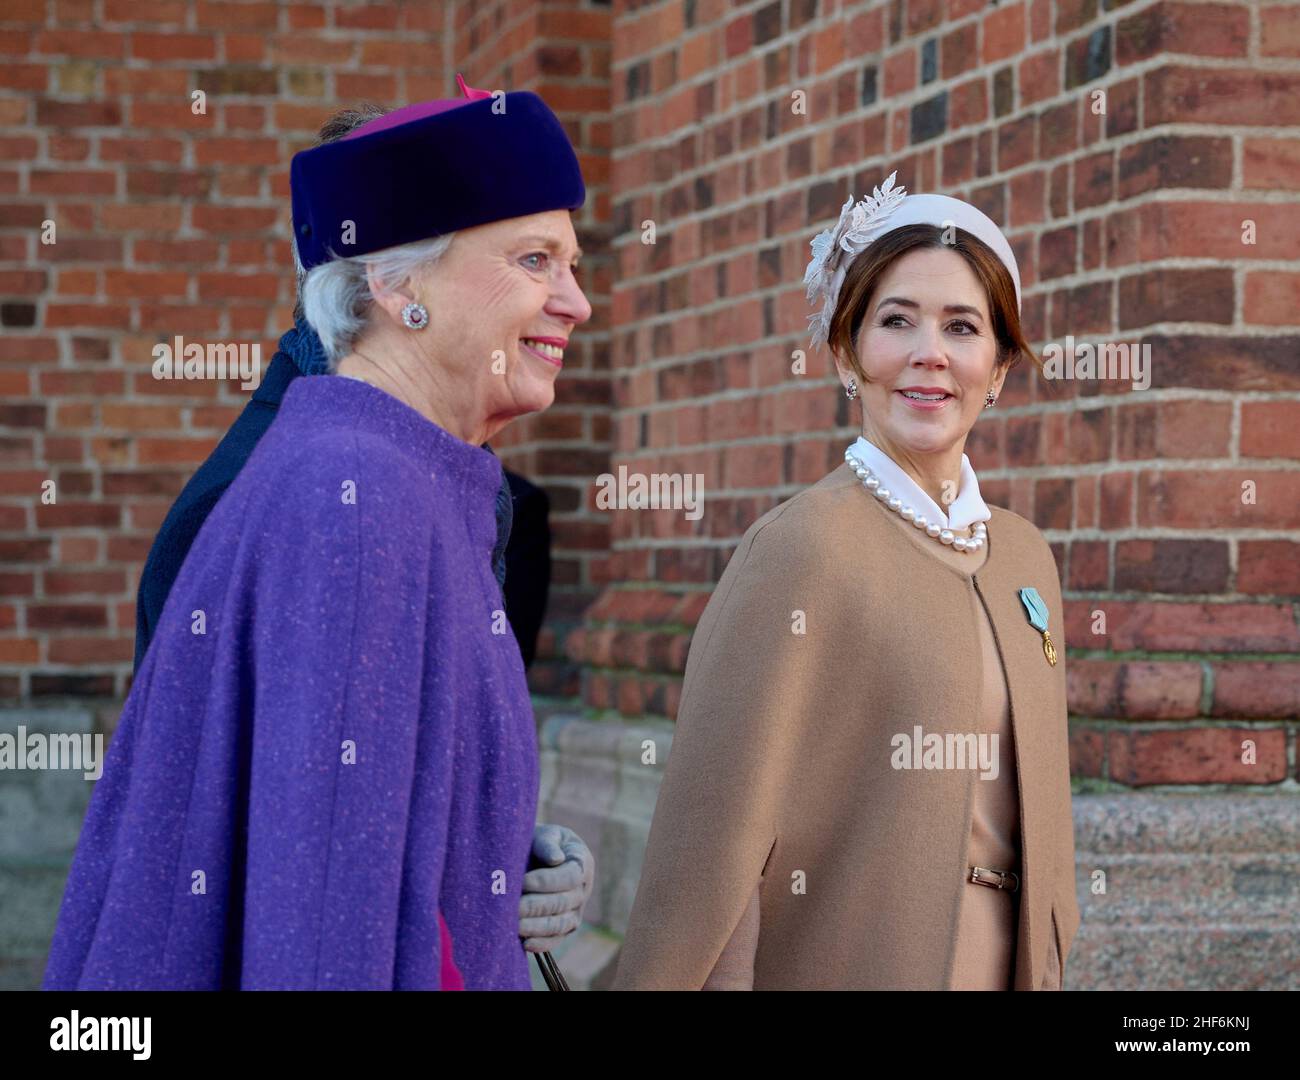 Roskilde, Denmark. 14th Jan, 2022. Princess Benedikte and Princess Mary during wreath-laying at Frederik 9's and Queen Ingrid's tomb at Roskilde Cathedral on the occasion of the 50th anniversary of Frederik 9's death and Queen Margrethe's 50th anniversary as regent. Photo by Stefan Lindblom/Stella Pictures/ABACAPRESS.COM Credit: Abaca Press/Alamy Live News Stock Photo